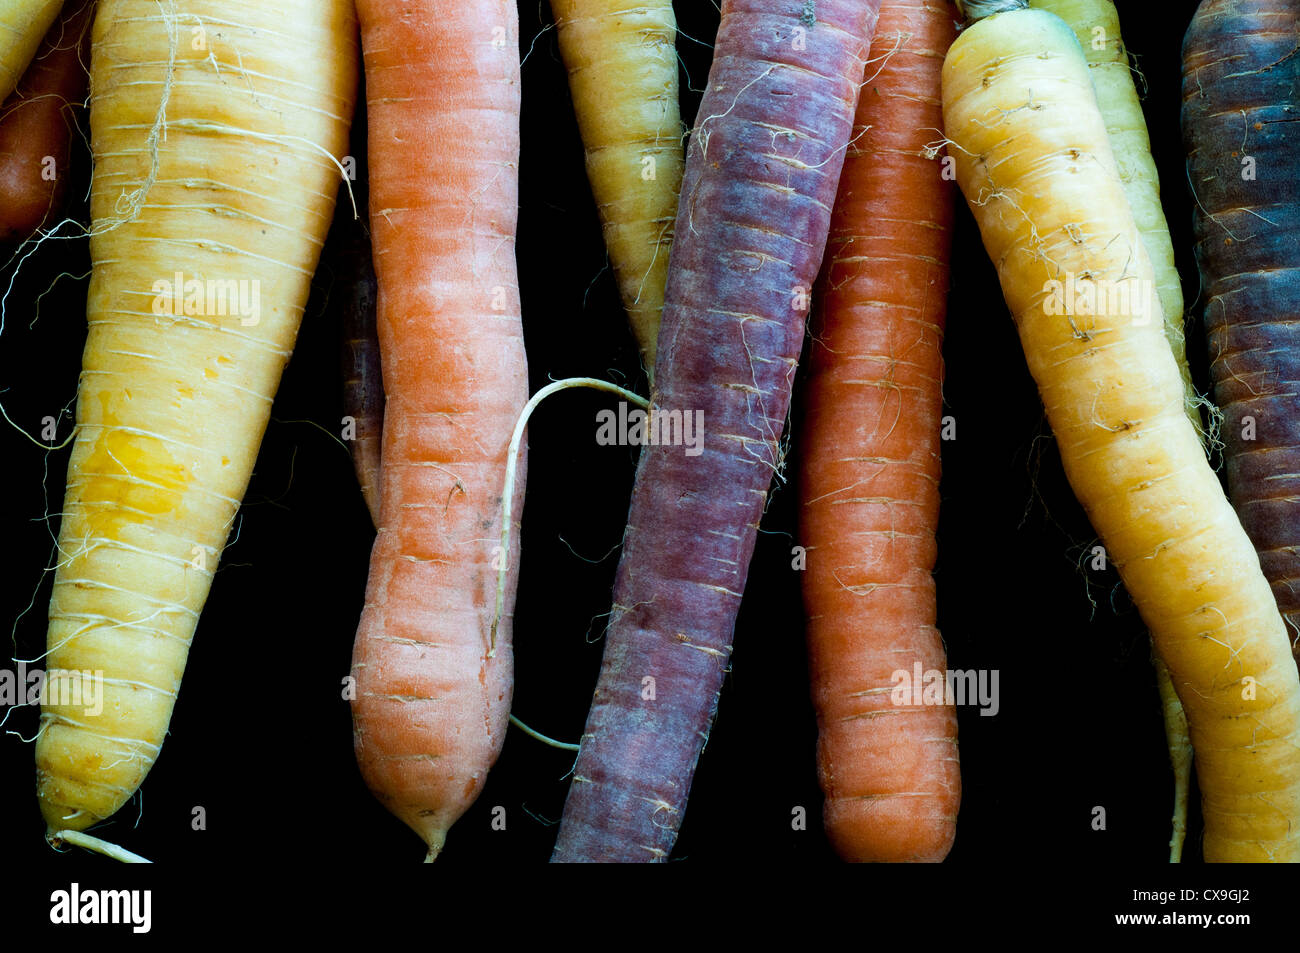 Bunch of organic multi-colored carrots Stock Photo